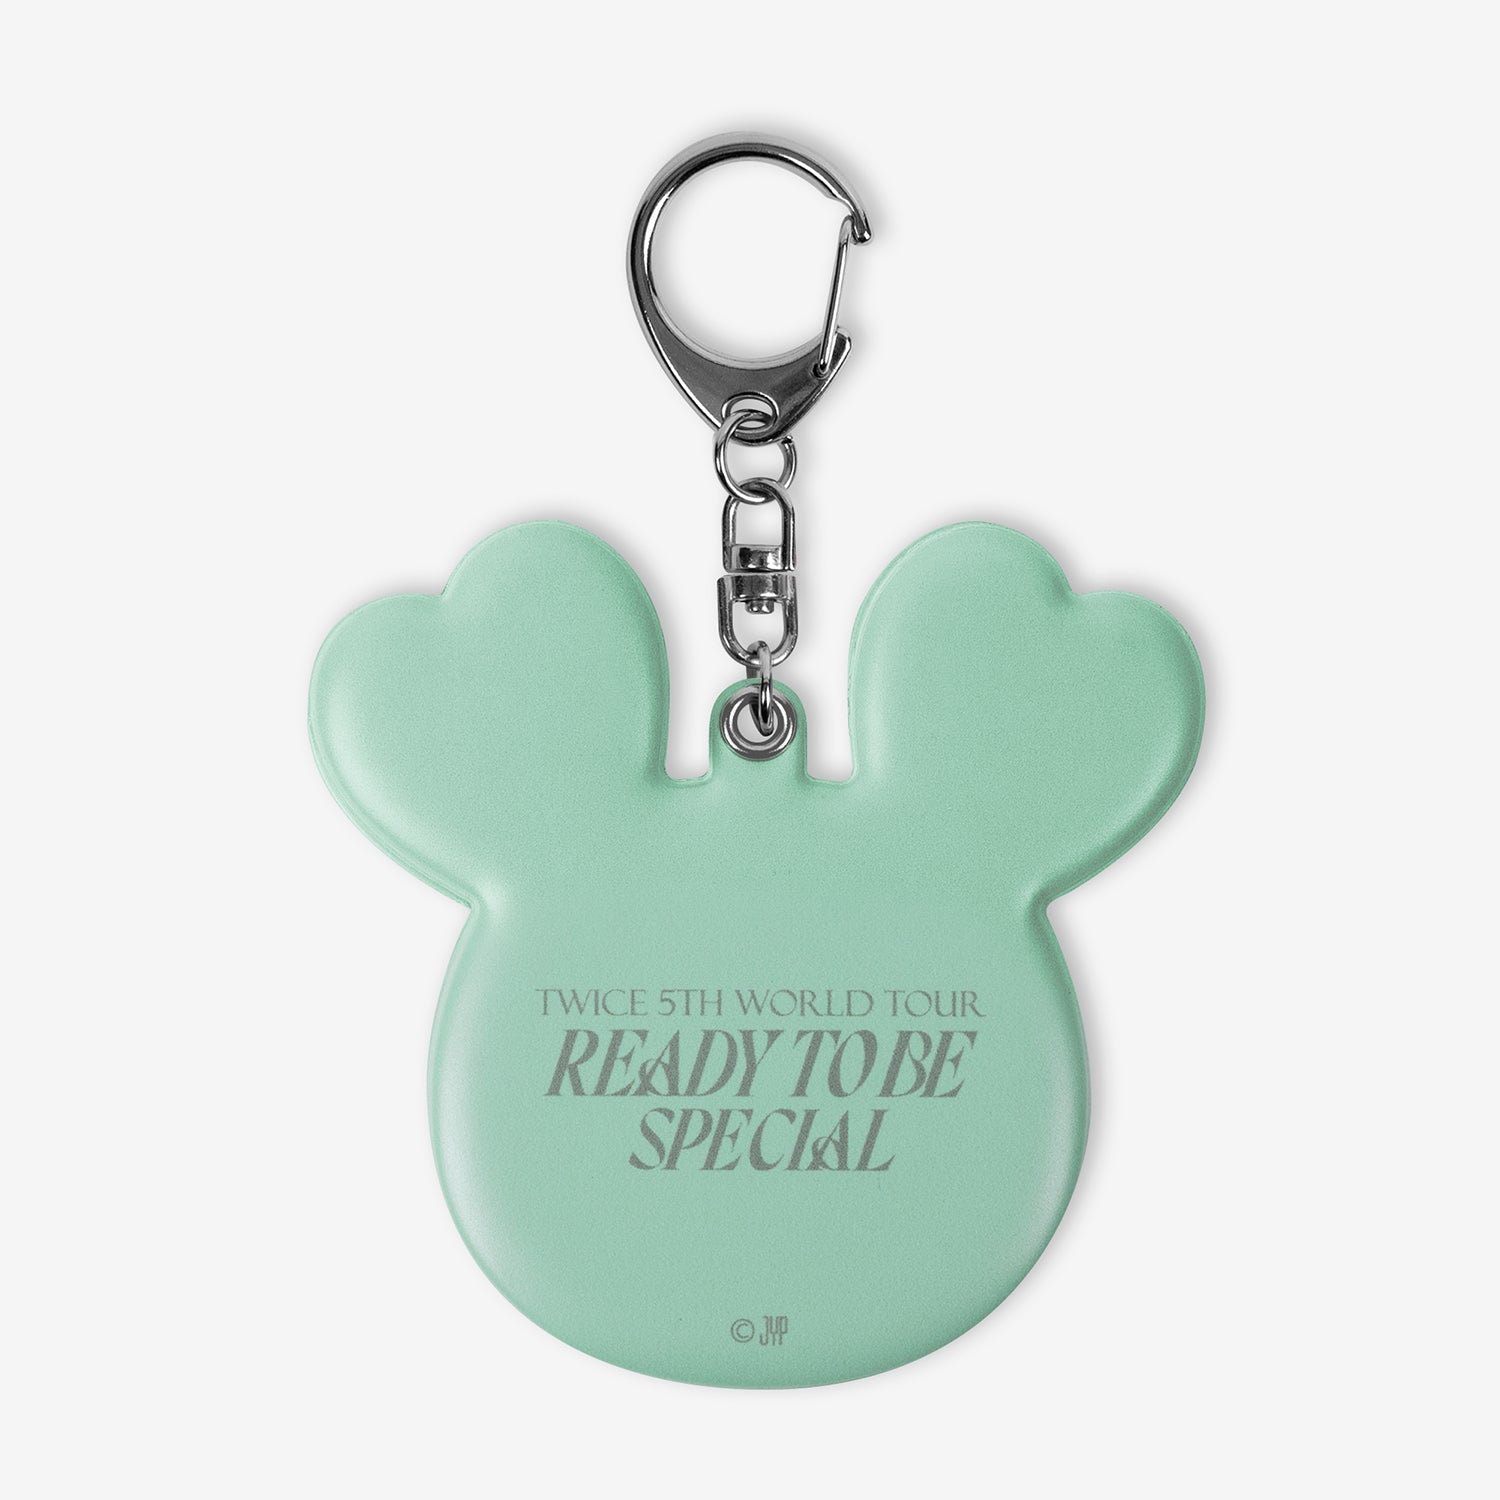 TWICE LOVELYS SLIDE MIRROR - MIVELY / TWICE『READY TO BE SPECIAL』